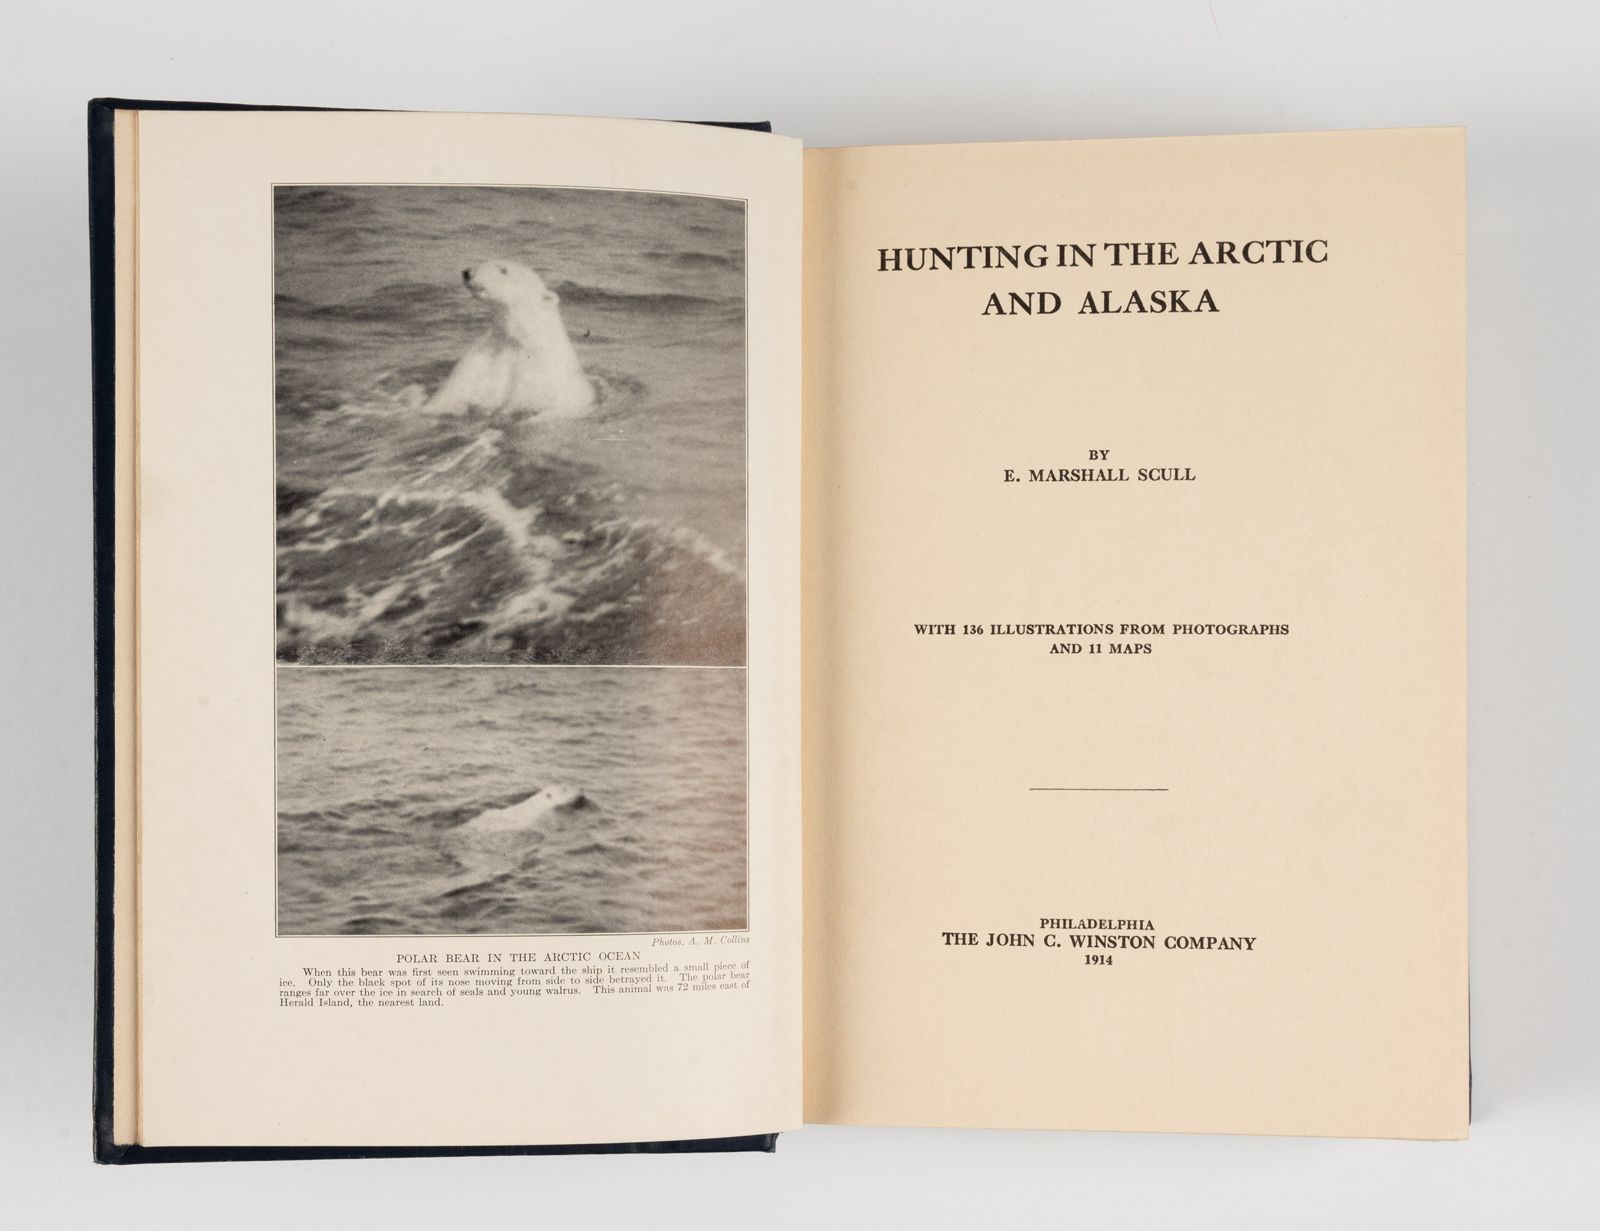 MARSHALL SCULL (E.). MARSHALL SCULL (E.). 
Hunting in the Arctic and Alaska.
Fil&hellip;